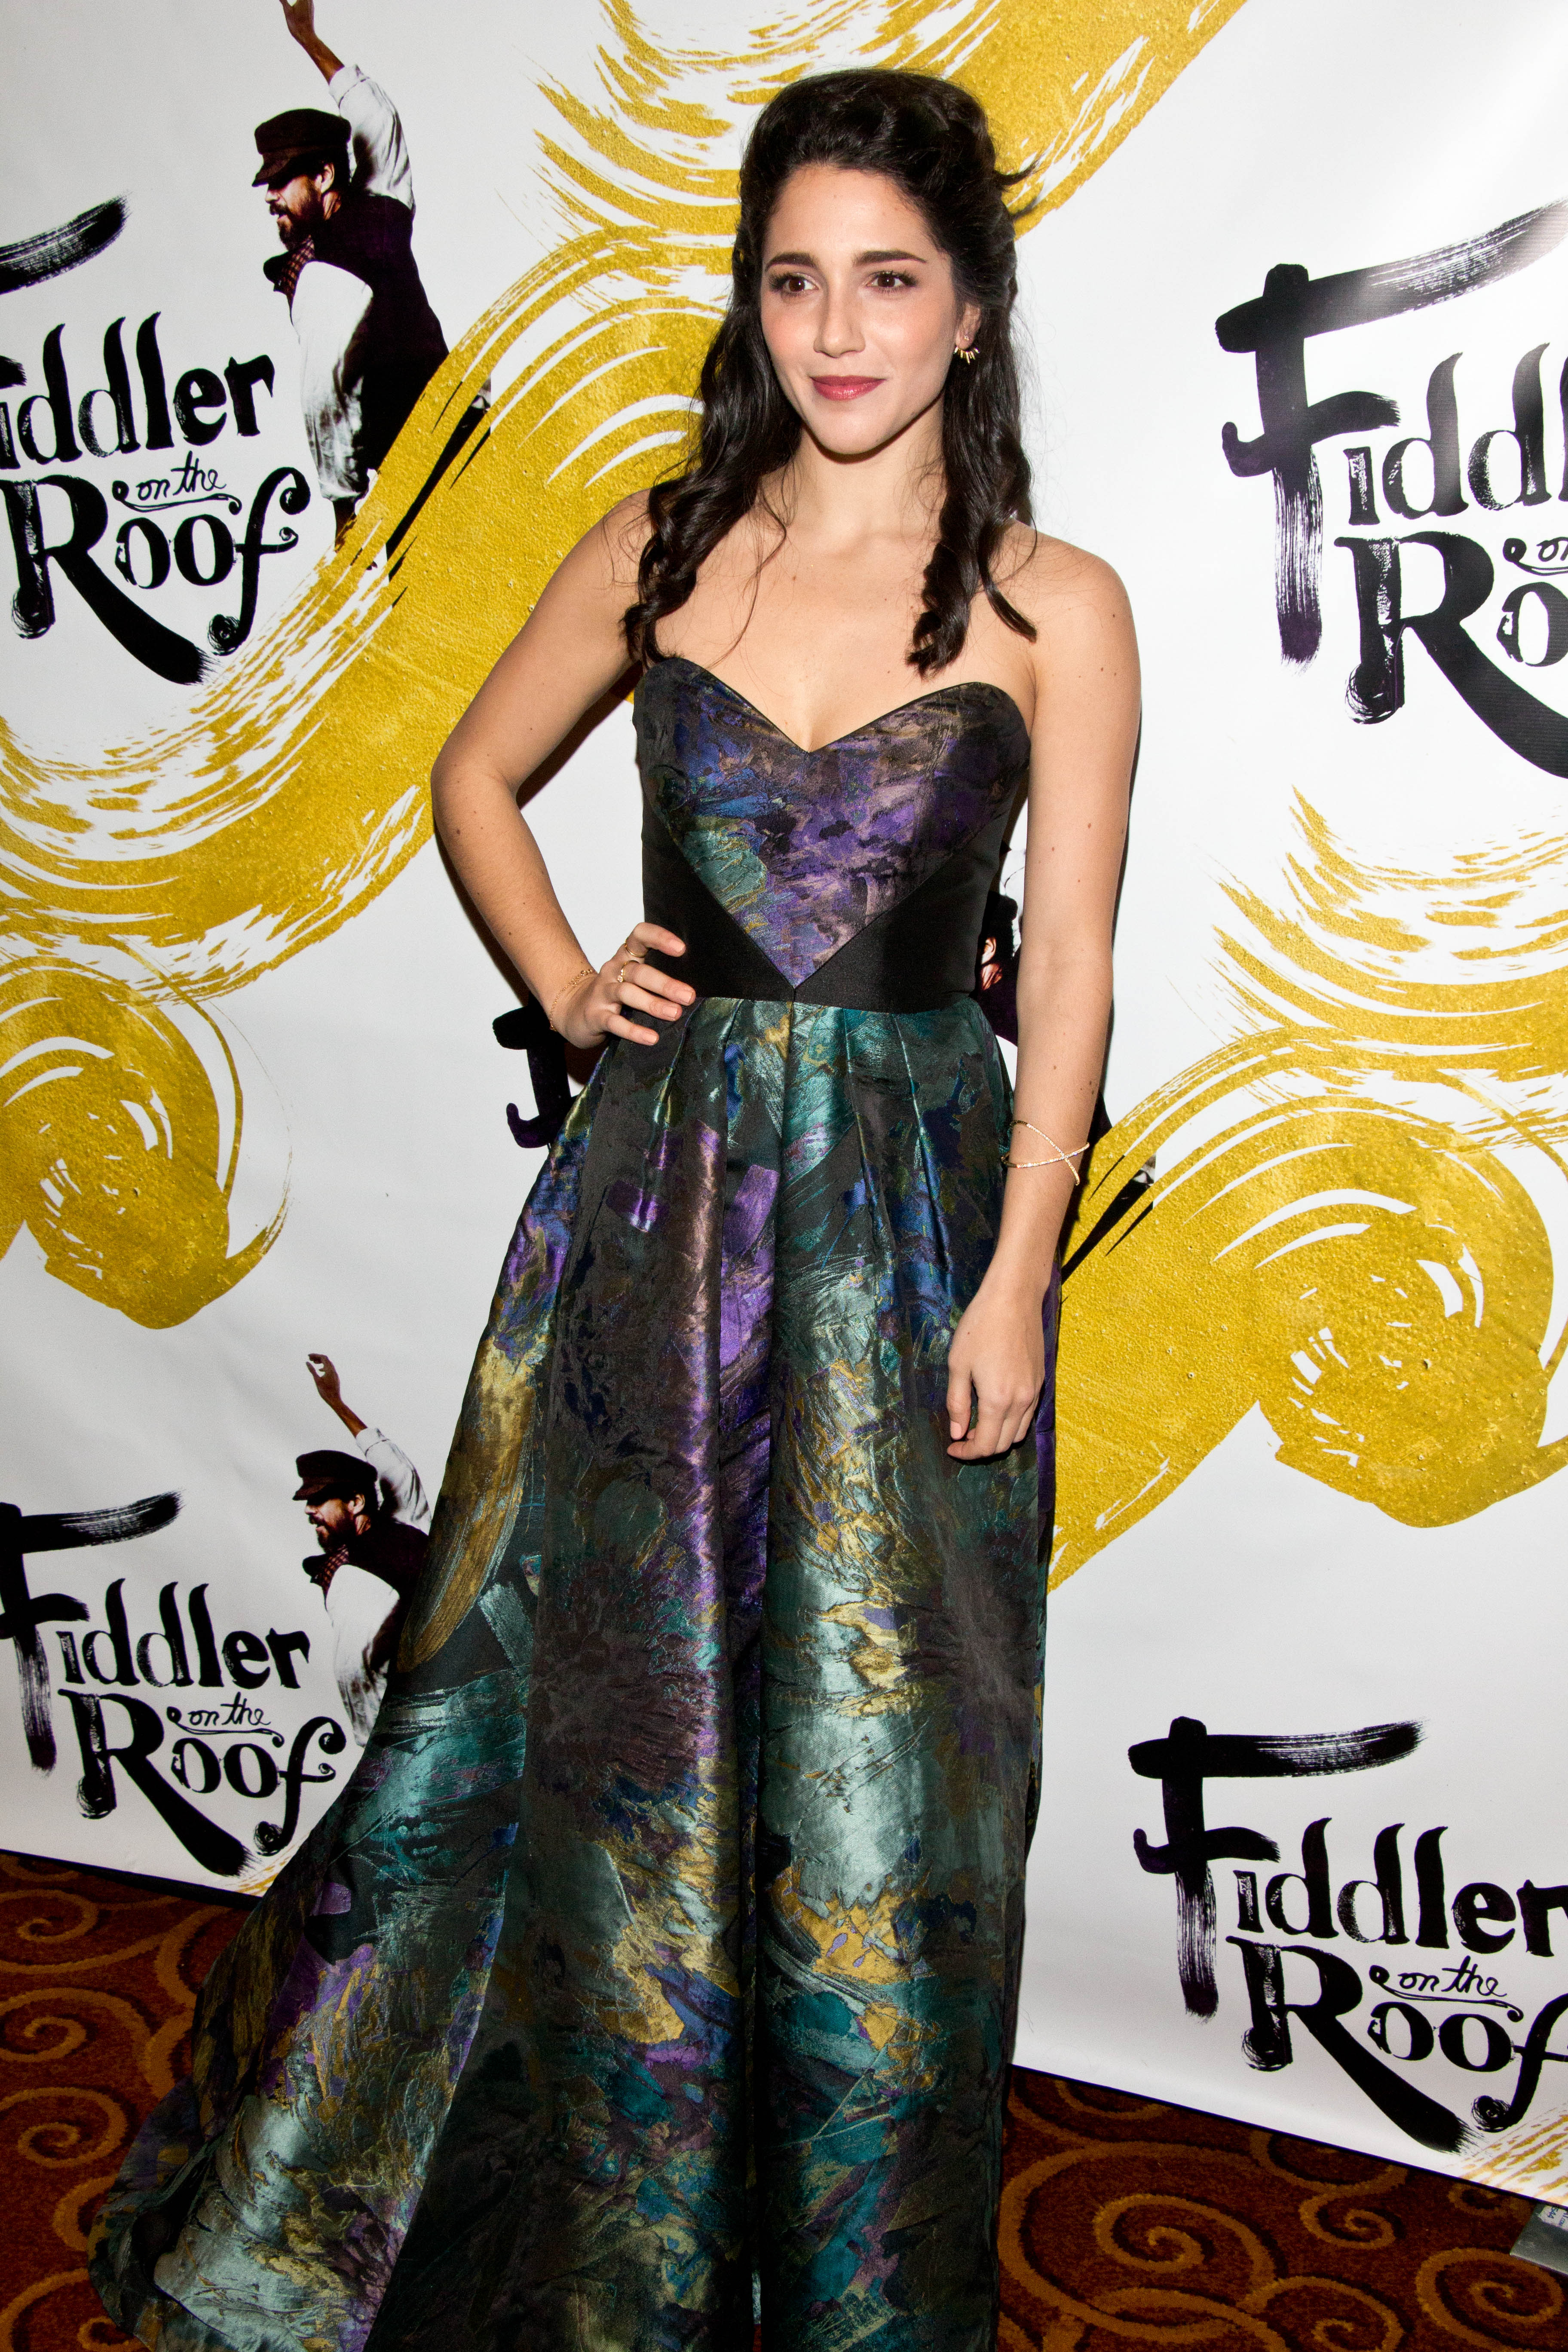 Opening night of Fiddler on the Roof on Broadway